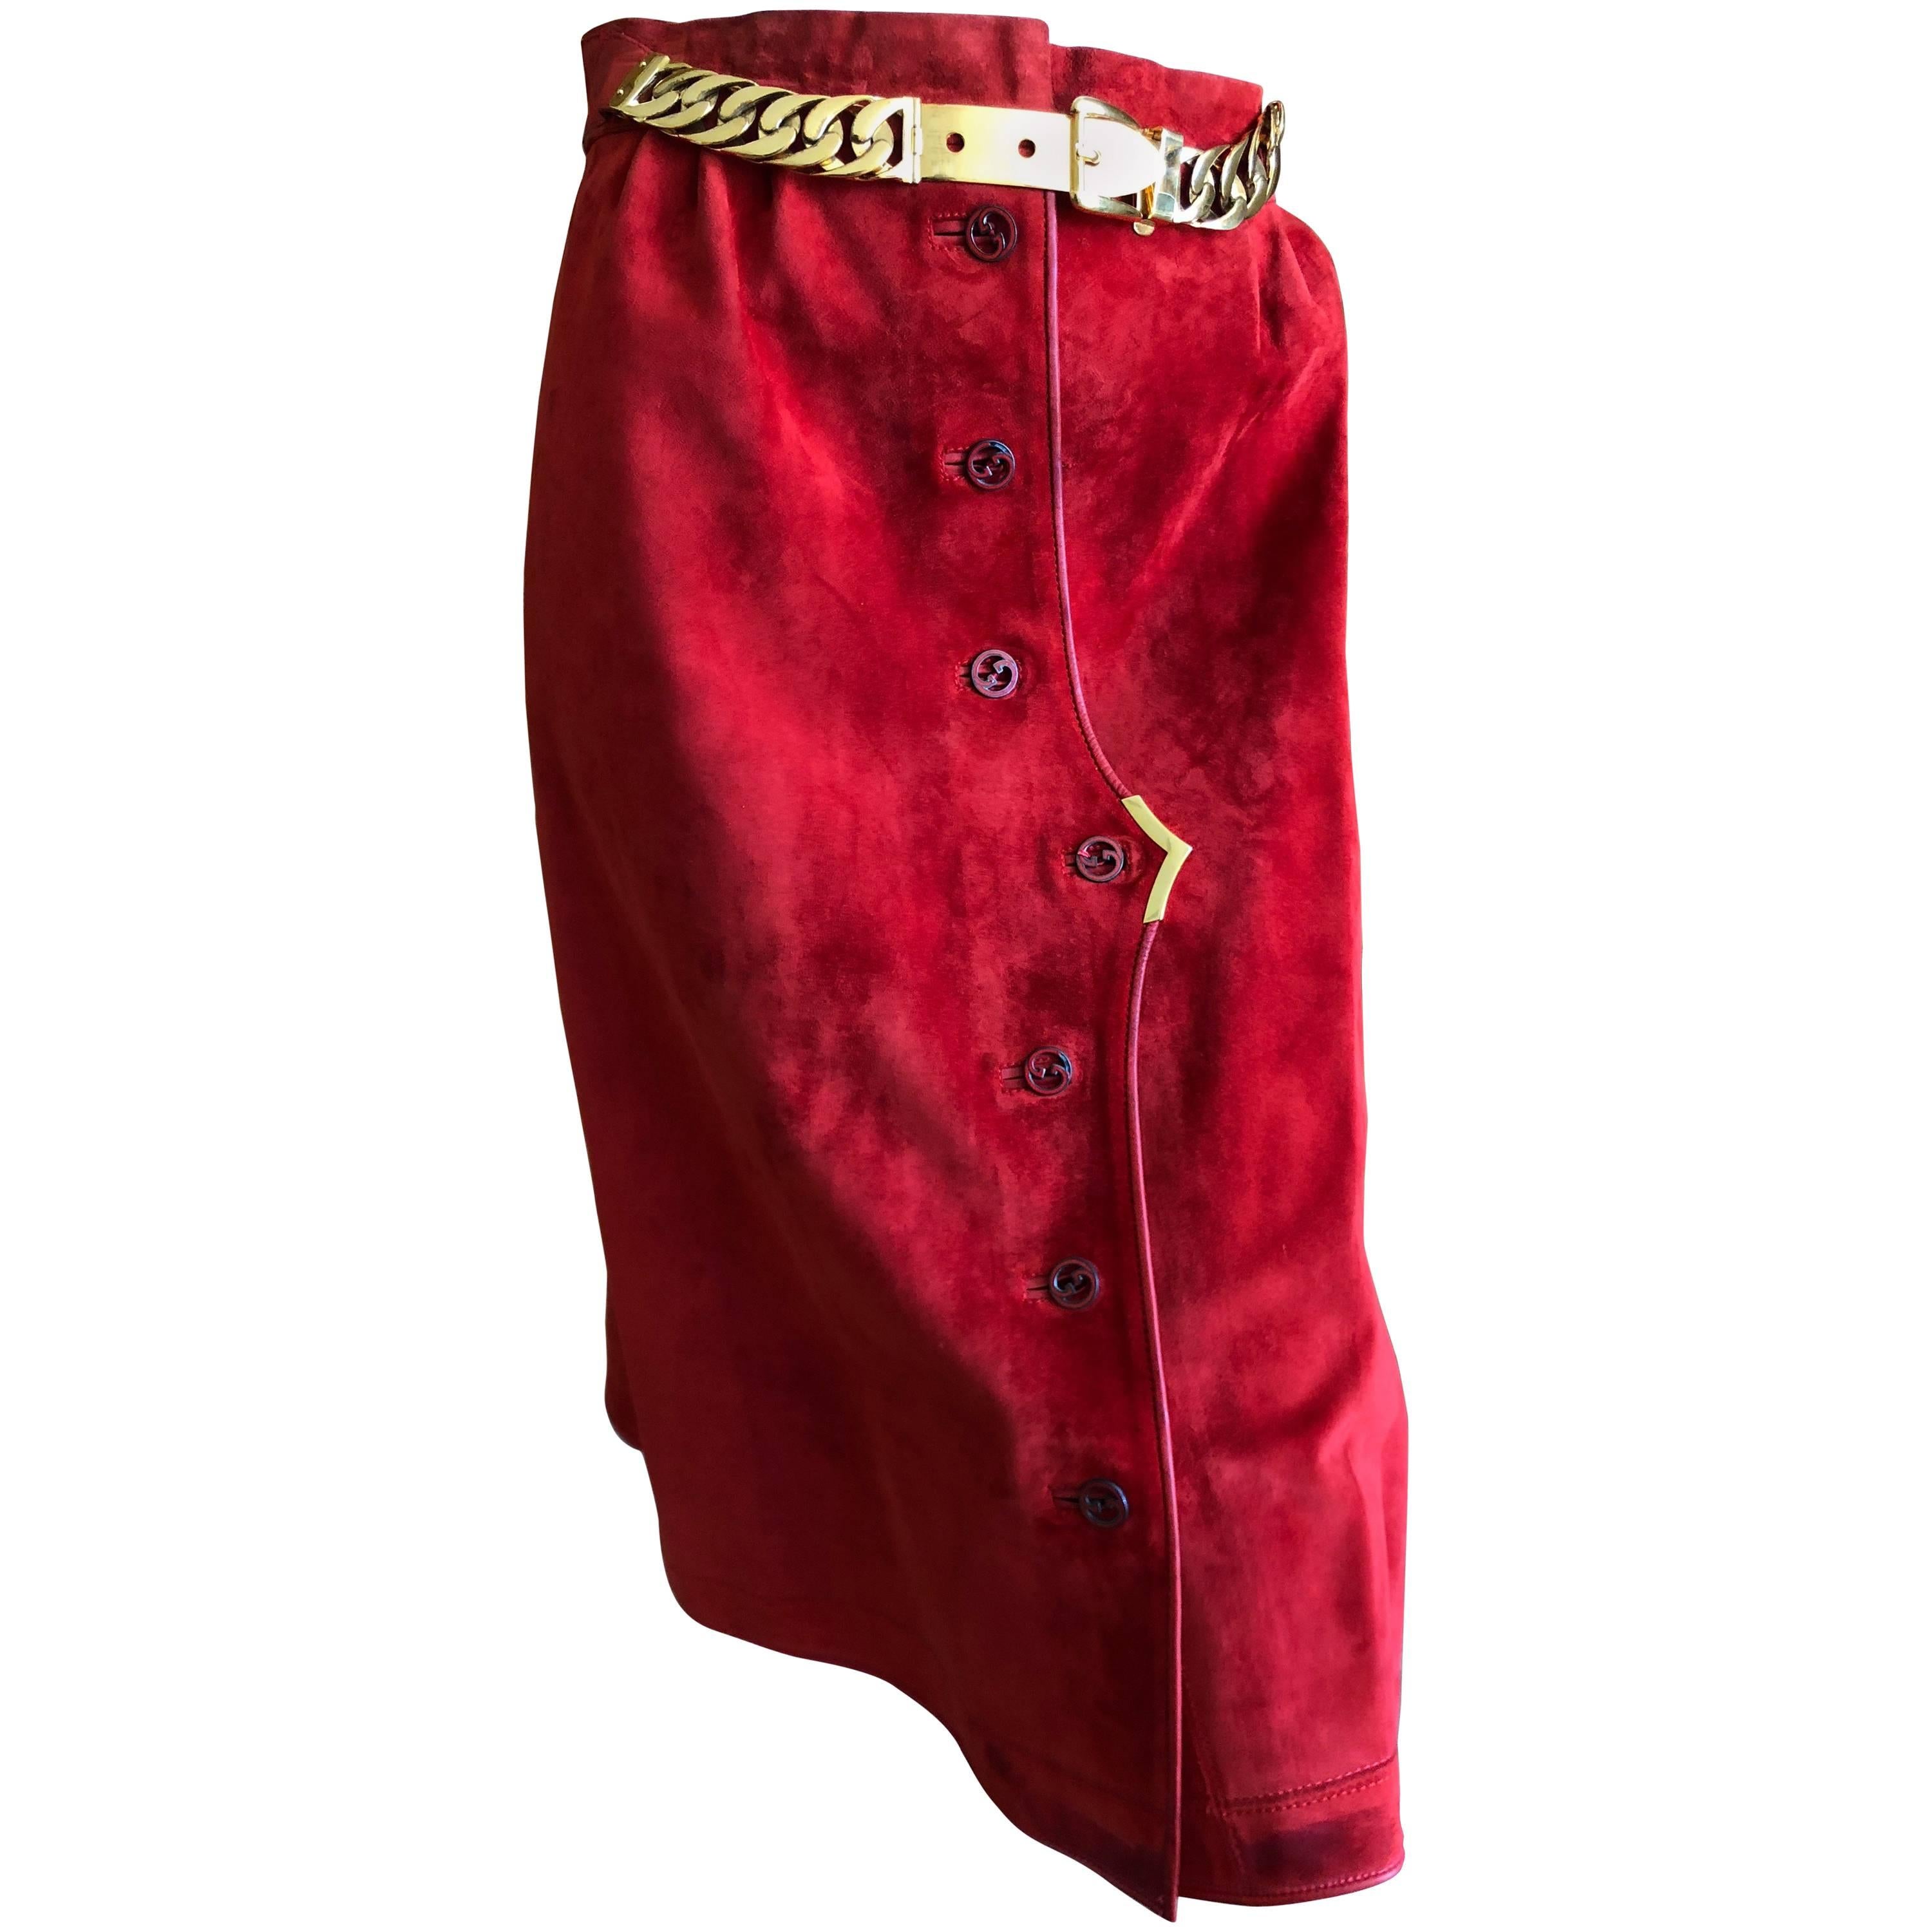  Gucci 1970's Red Leather Trim Suede Skirt with Chain Details and Big GG Buttons For Sale